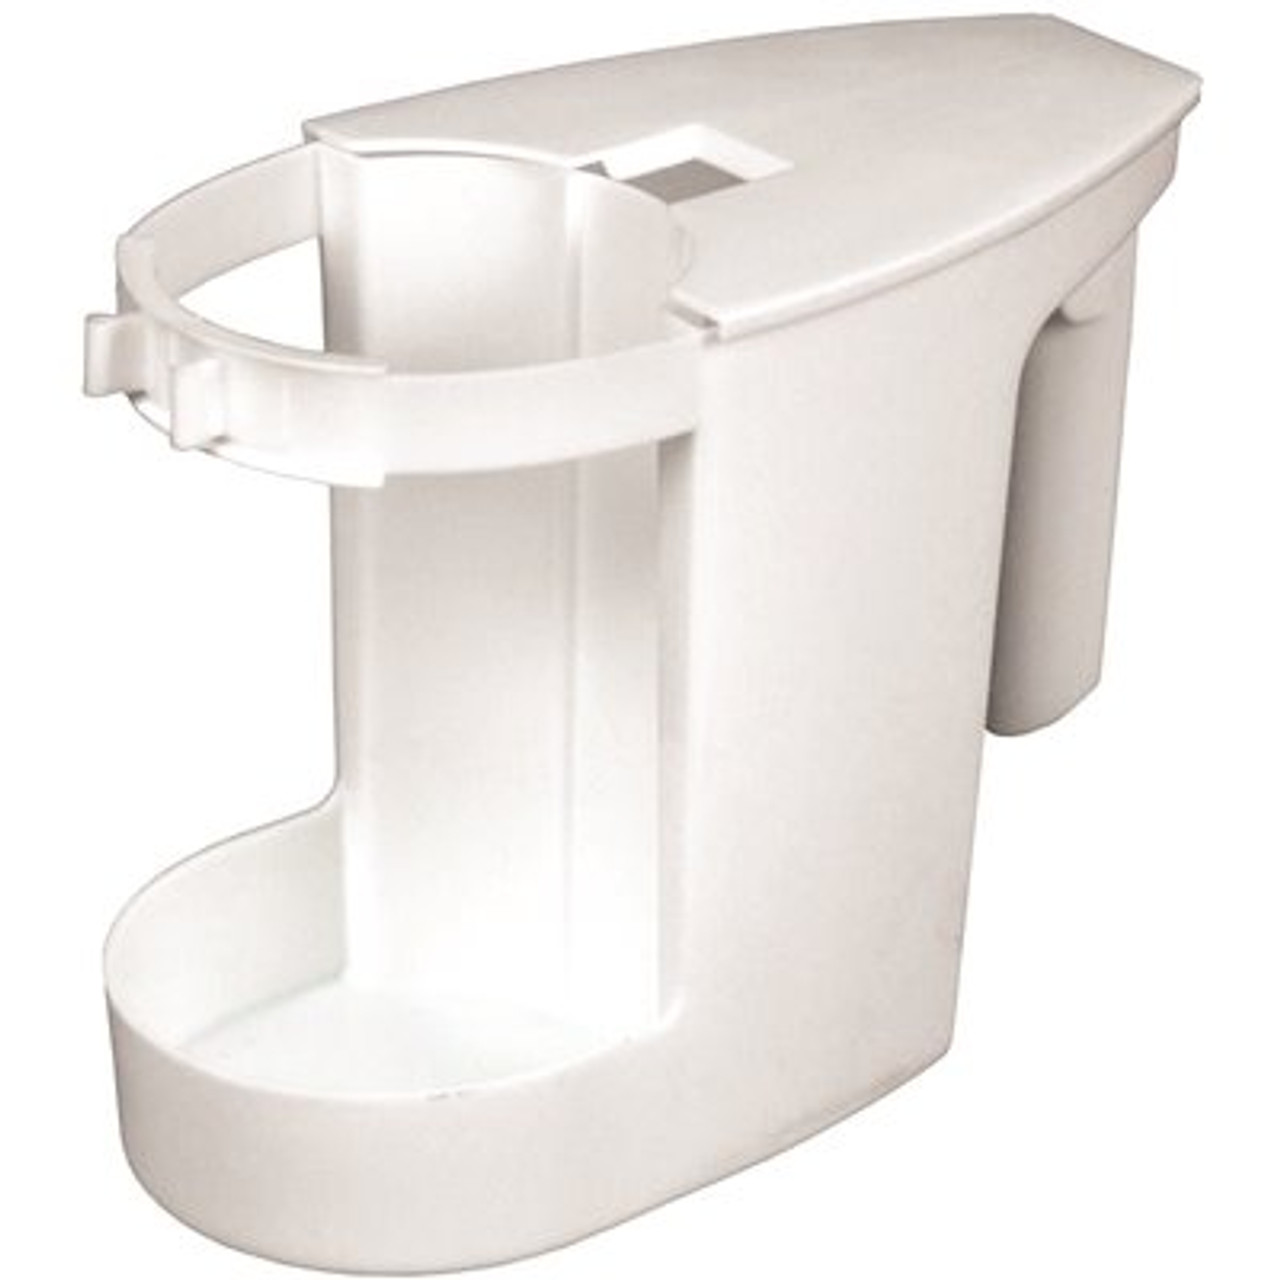 IMPACT PRODUCTS Toilet Bowl Caddy, White